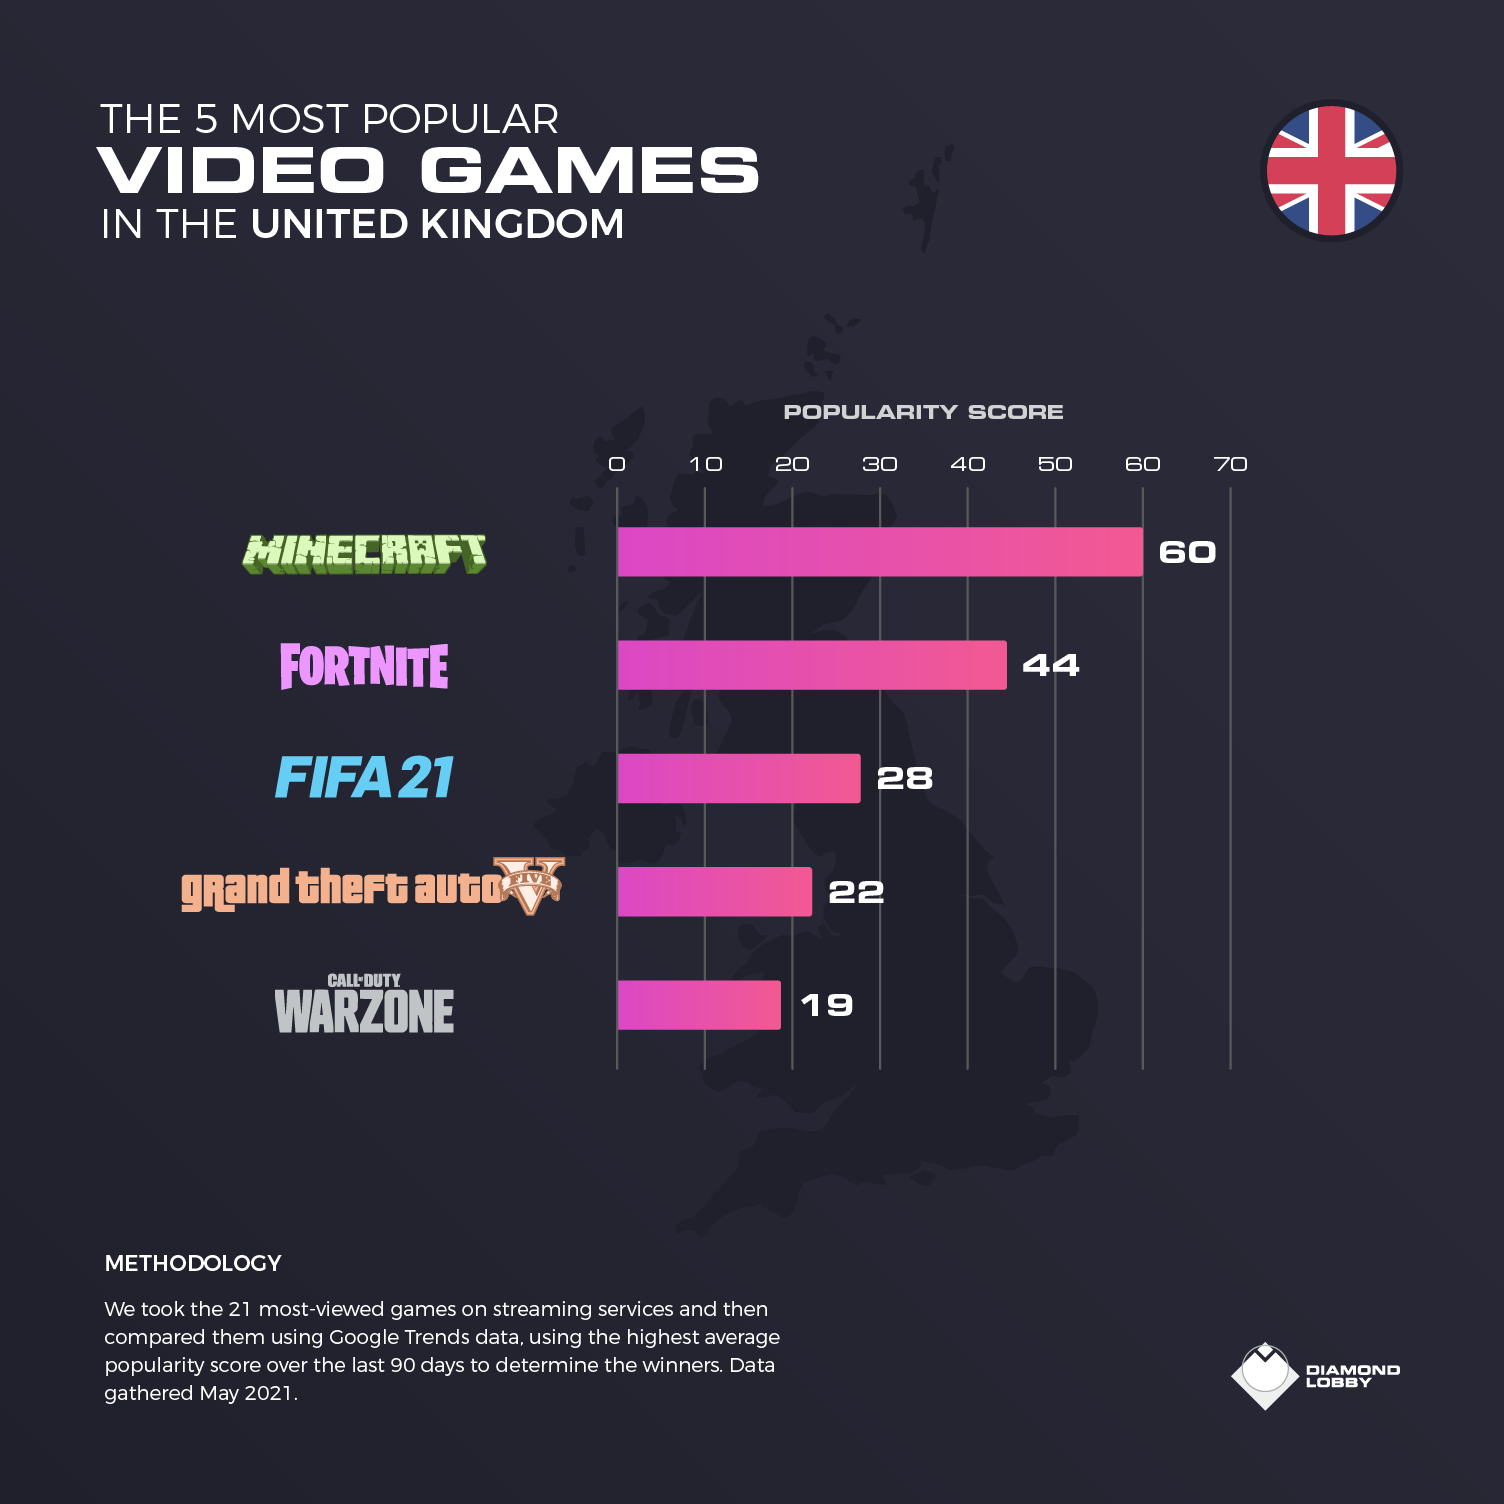 The top 5 video games in the UK